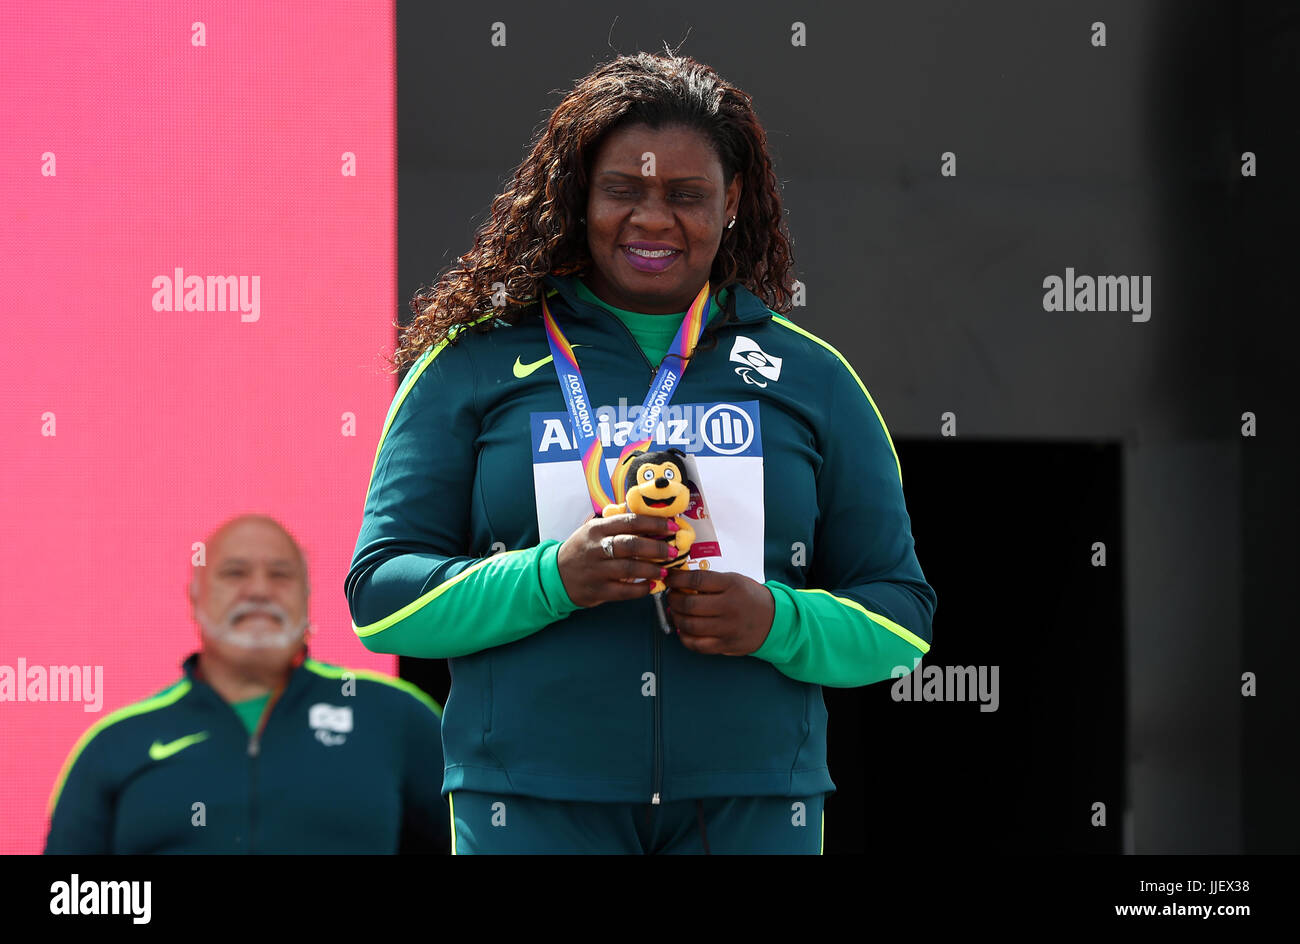 Brazil's Izabela Campos with her bronze medal after the Women's Discus Throw F11 Final during day five of the 2017 World Para Athletics Championships at London Stadium. PRESS ASSOCIATION Photo. Picture date: Tuesday July 18, 2017. See PA story ATHLETICS Para. Photo credit should read: Simon Cooper/PA Wire. RESTRICTIONS: Editorial use only. No transmission of sound or moving images and no video simulation. Stock Photo